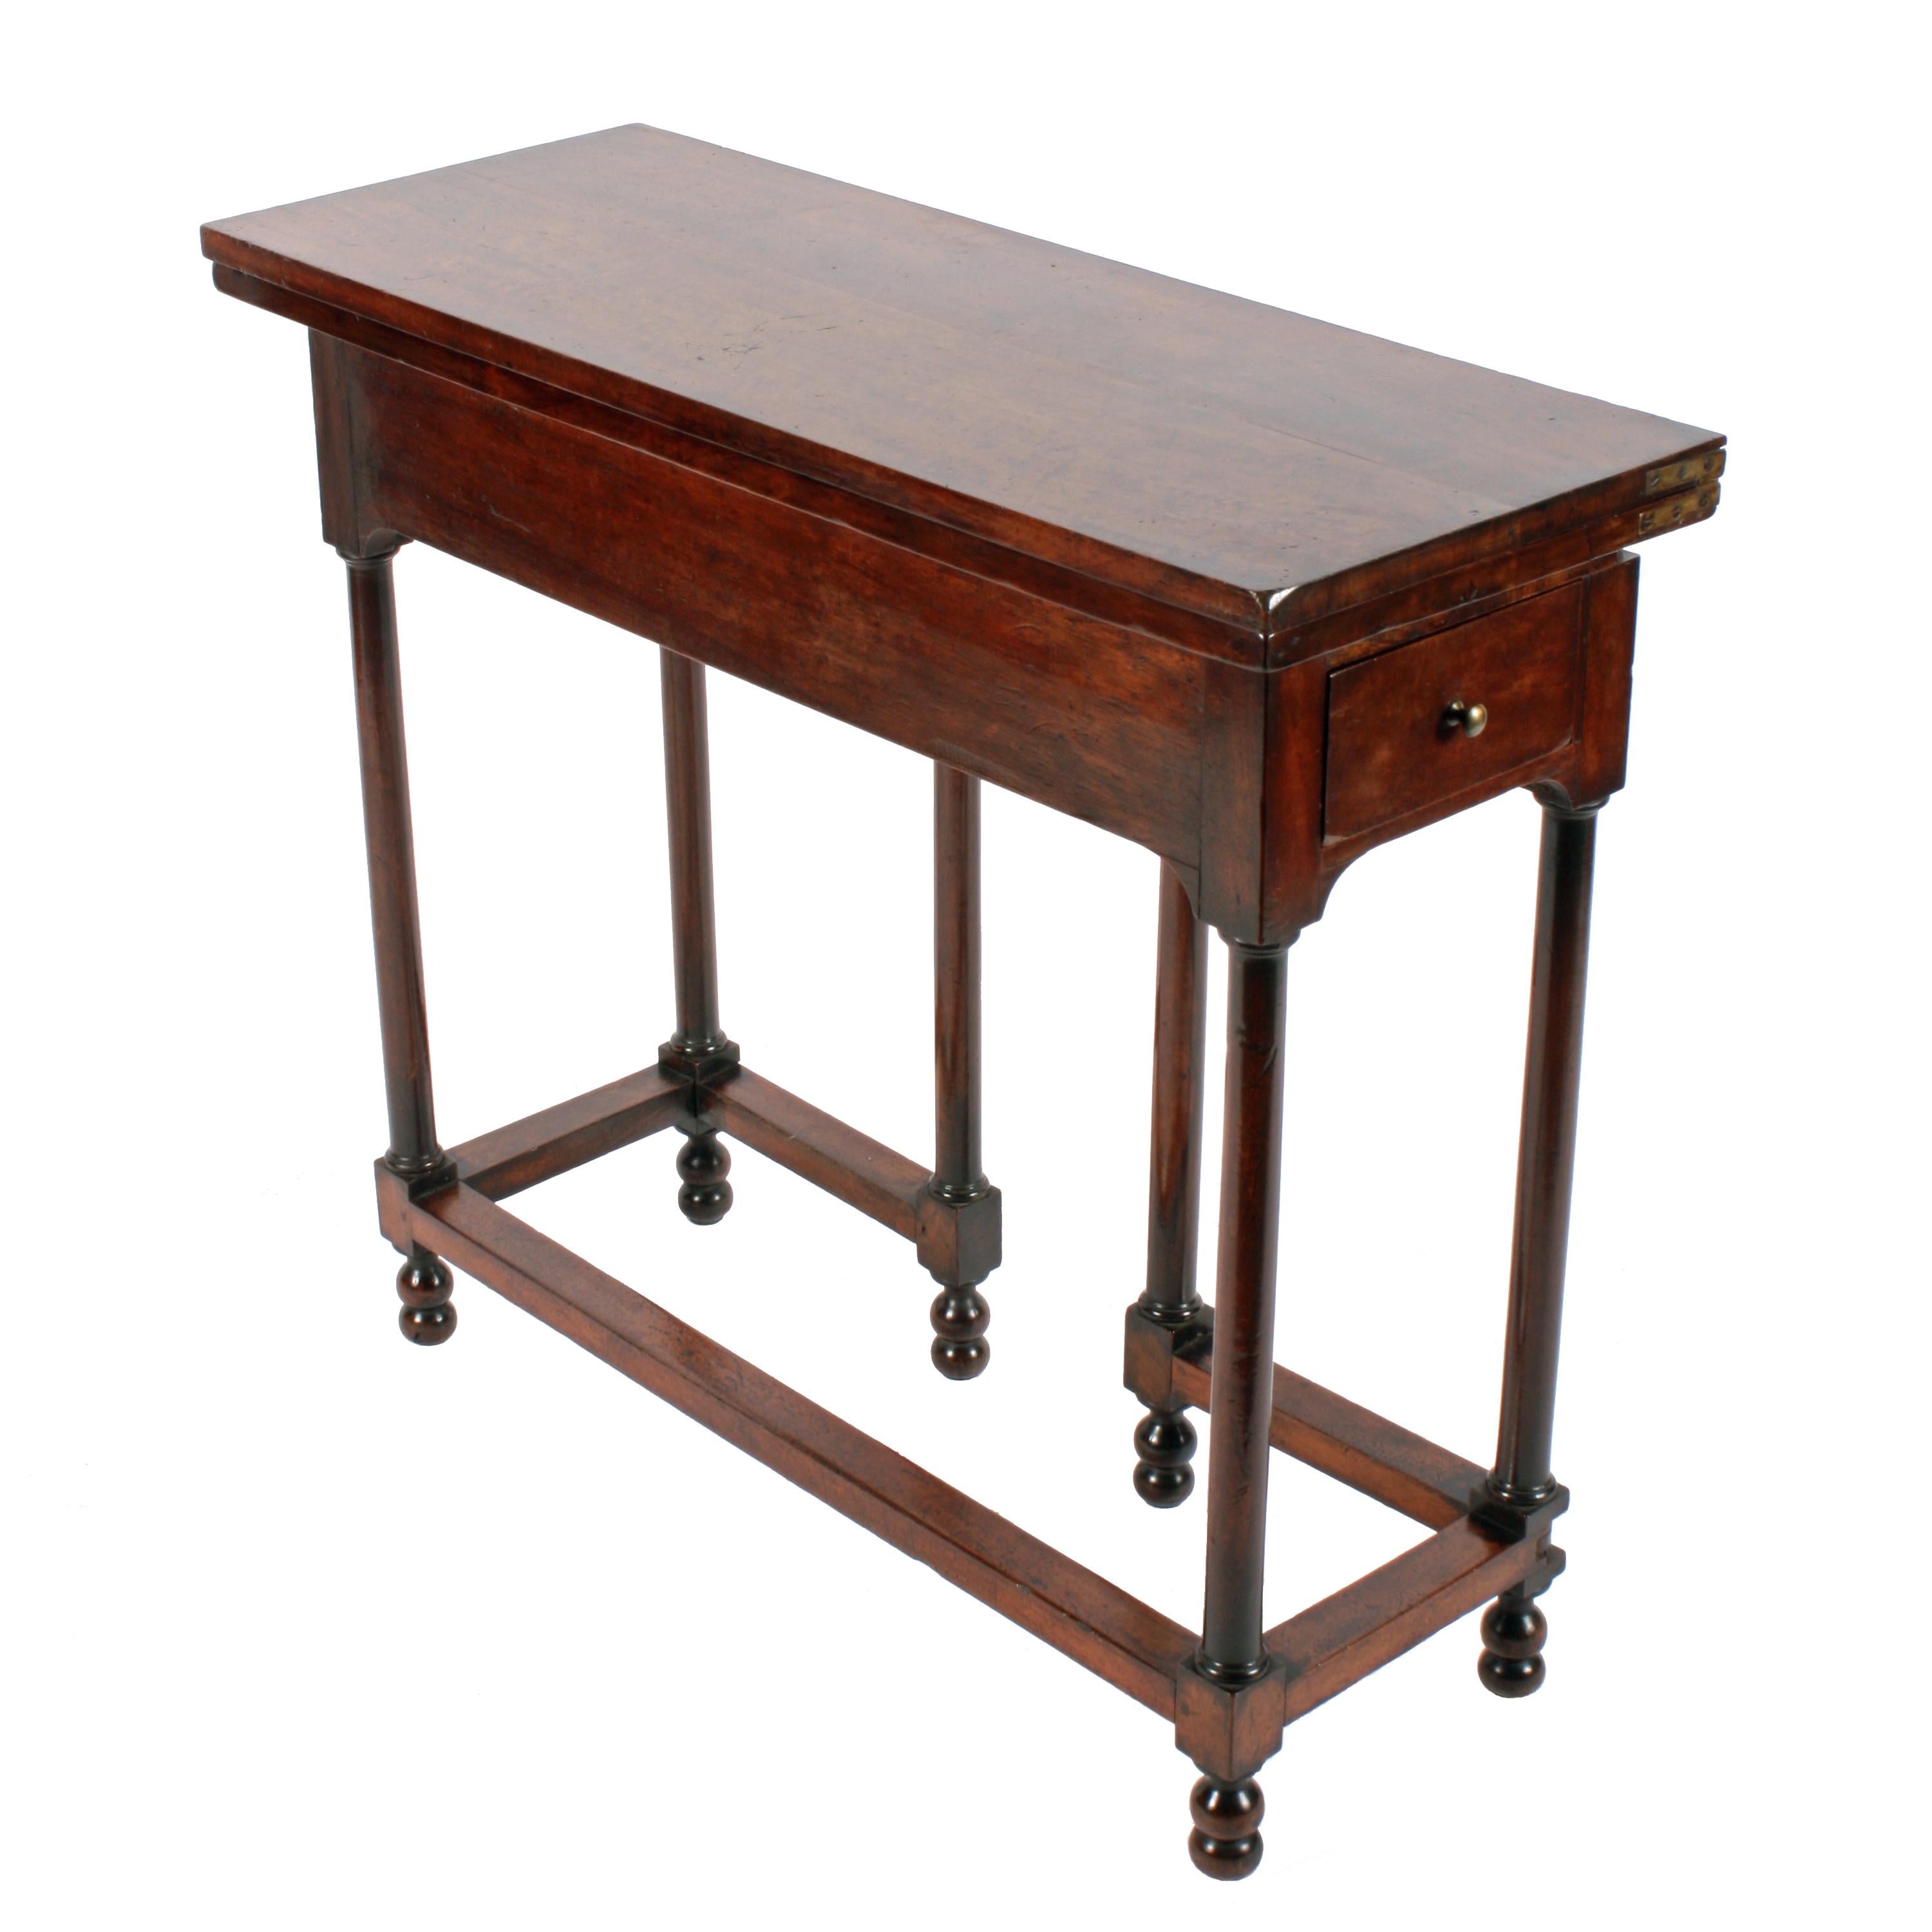 Early 18th century walnut card table.


A rare early 18th century walnut turn over top card table.

The table stands on six turned legs with cross stretchers with gated legs at the back to support the leaf when open.

Each end has a narrow